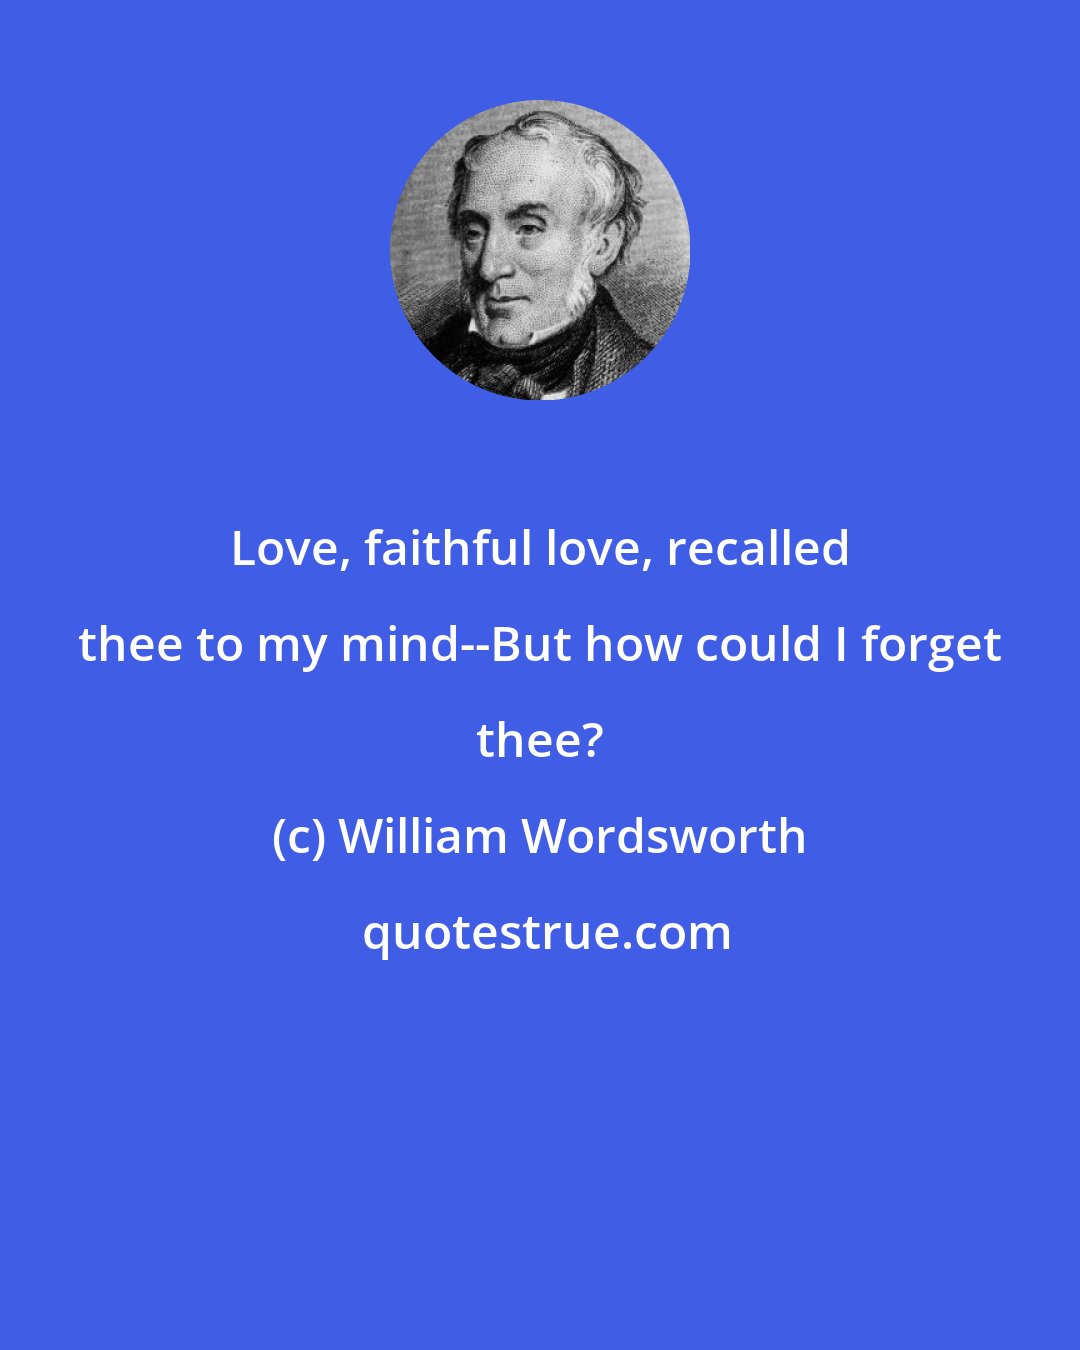 William Wordsworth: Love, faithful love, recalled thee to my mind--But how could I forget thee?